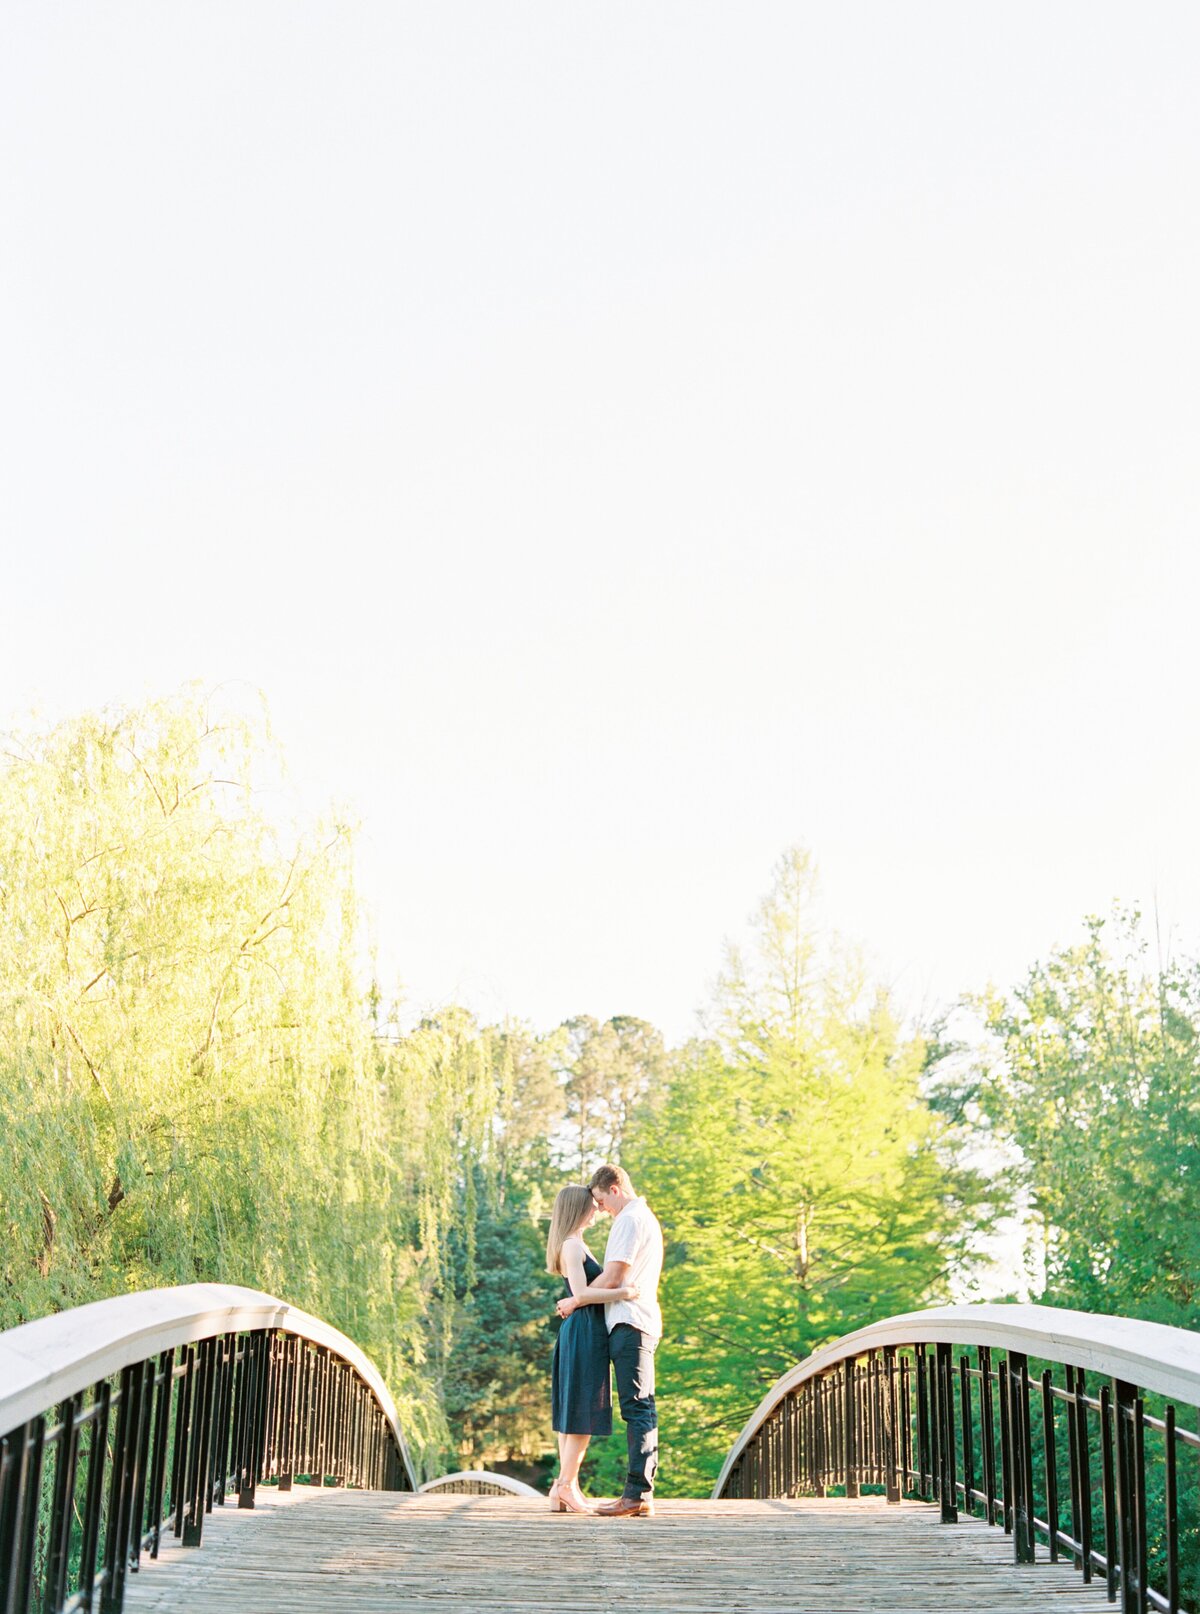 Pullen Park Engagement Session Raleigh NC_0045